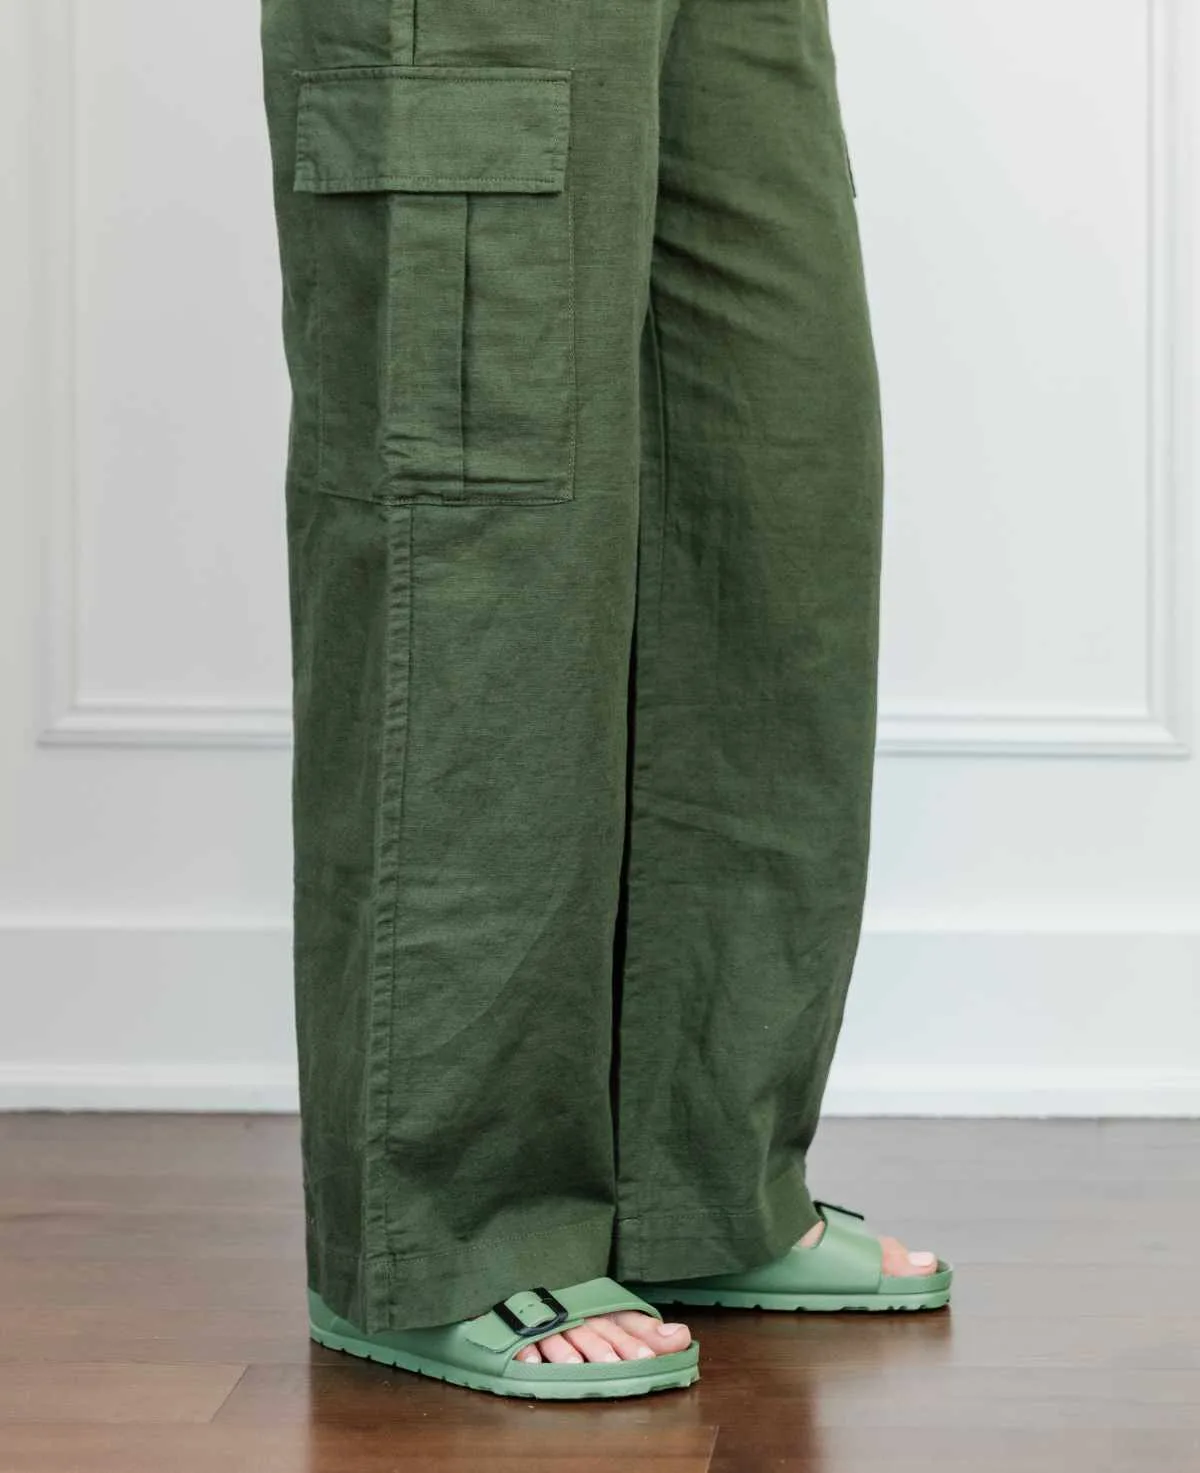 Cropped view of woman's legs wearing green Birkenstock like sandals with full length wide olive green linen pants.